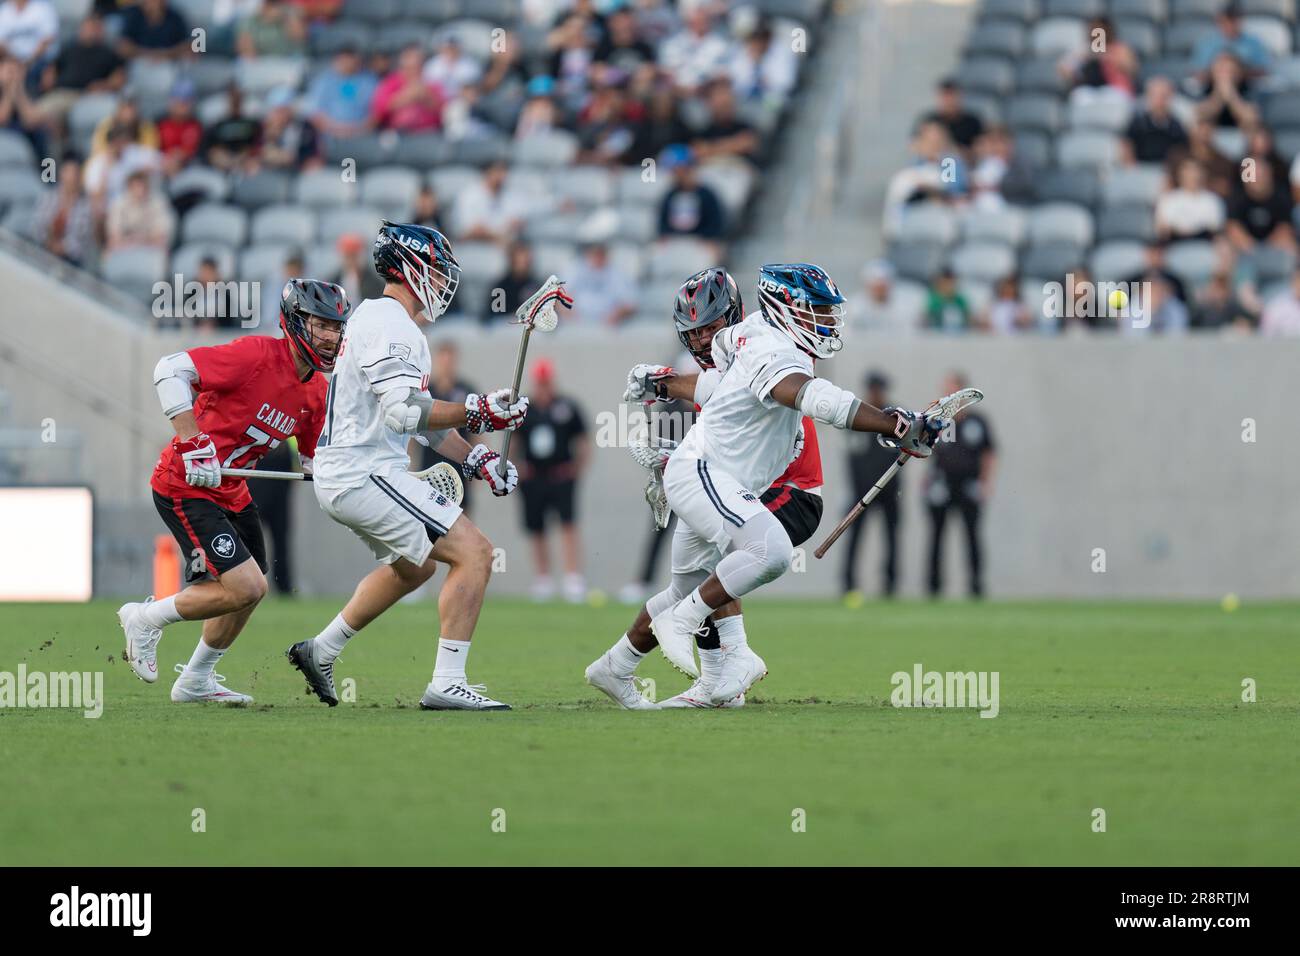 San Diego, USA. 21st June, 2023. USA wins a faceoff at the World Lacrosse Men's Championship opening game USA vs Canada at Snapdragon Stadium. Credit: Ben Nichols/Alamy Live News Stock Photo